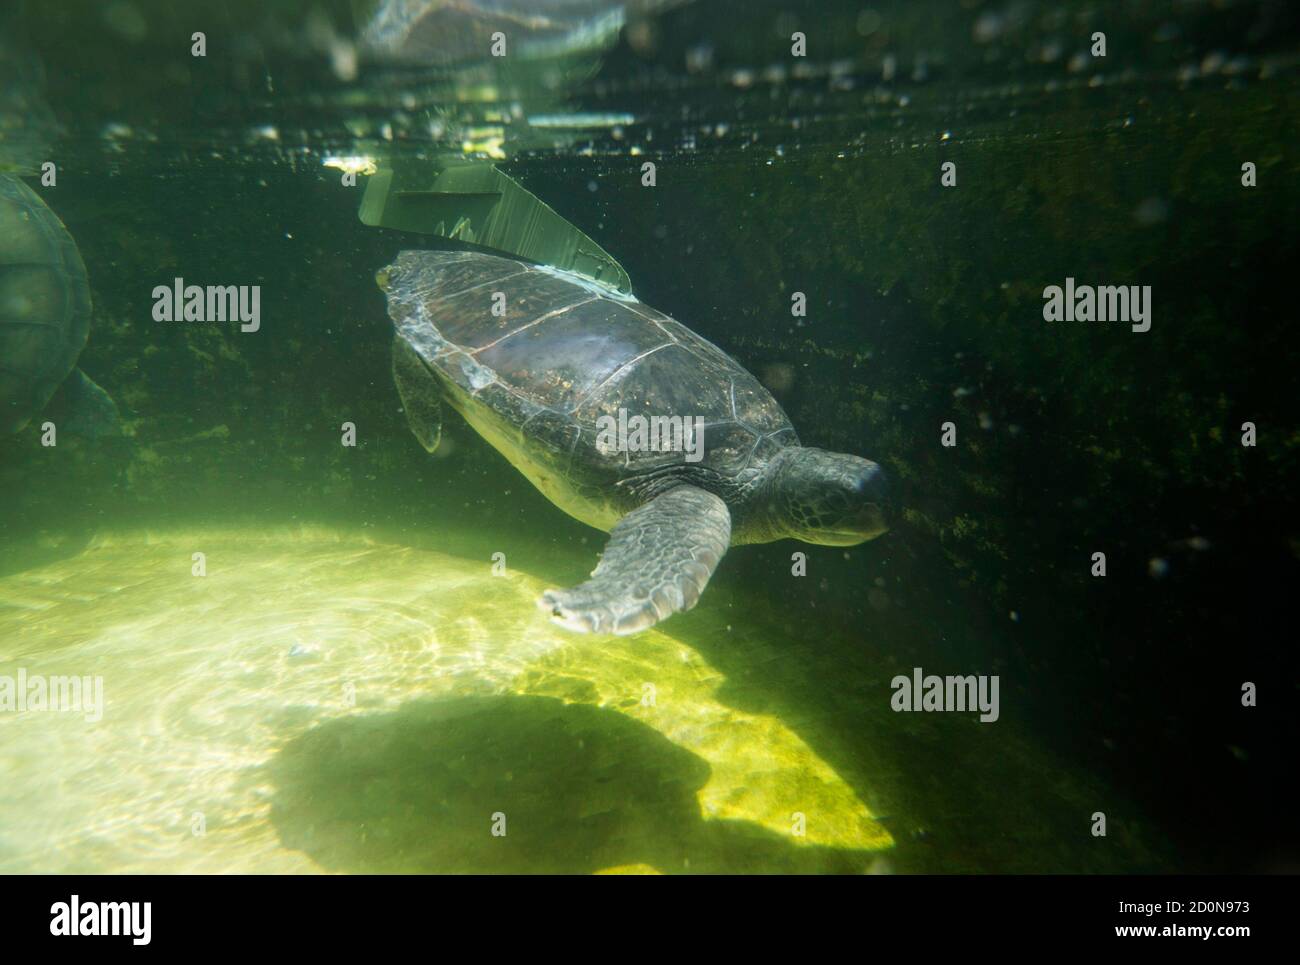 Hofesh, an injured male green sea turtle, swims in a pool after an artificial fin was attached to his back at the Israel Sea Turtle Rescue Center, in Michmoret north of Tel Aviv April 9, 2014. The turtle was brought to the centre some four years ago missing both limbs on the left-hand-side of his body, but on Wednesday the artificial fin, designed by an industrial design student, Shlomi Gez, was attached to Hofesh's back, offering him stability and a more permanent solution to his disability. Hofesh will not be released back into the wild as he cannot survive if something were to happen to the Stock Photo